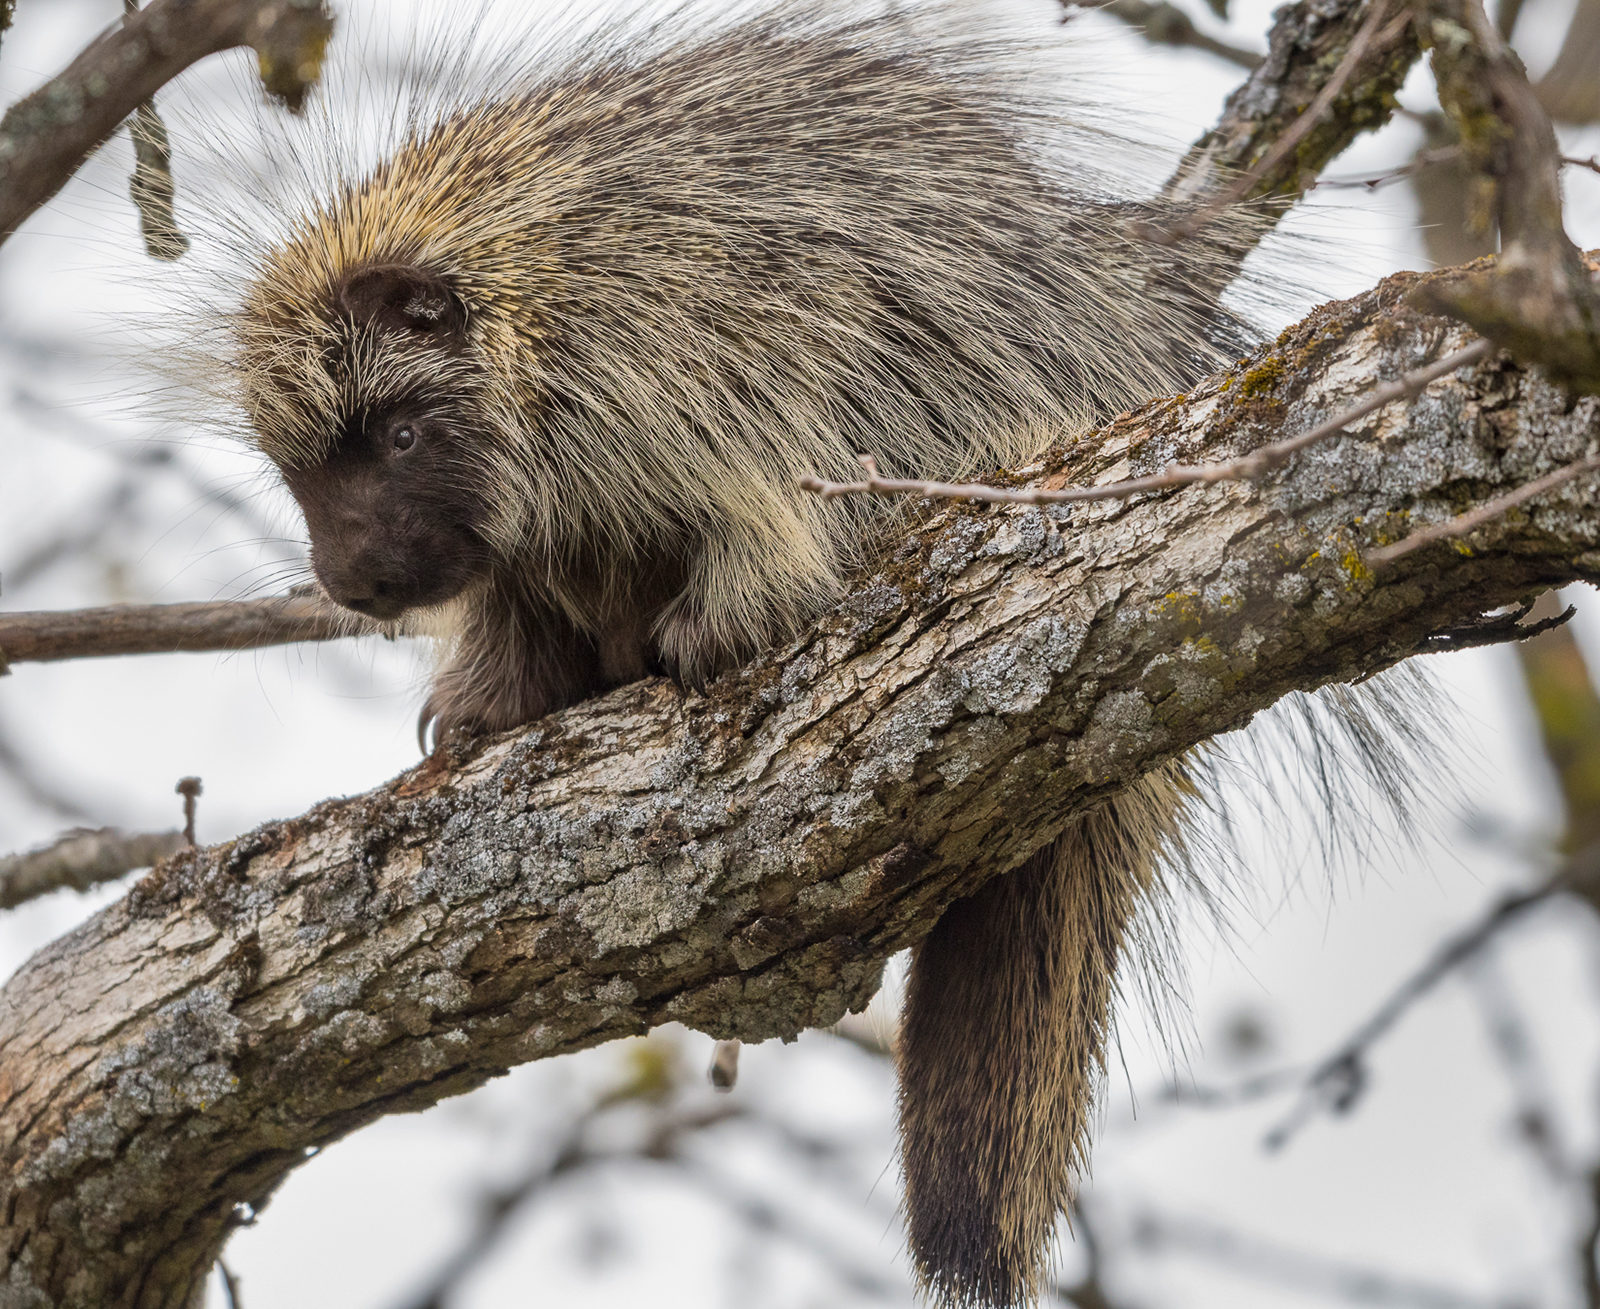 Bay Nature Magazine: Do Porcupines Live in the Bay Area?